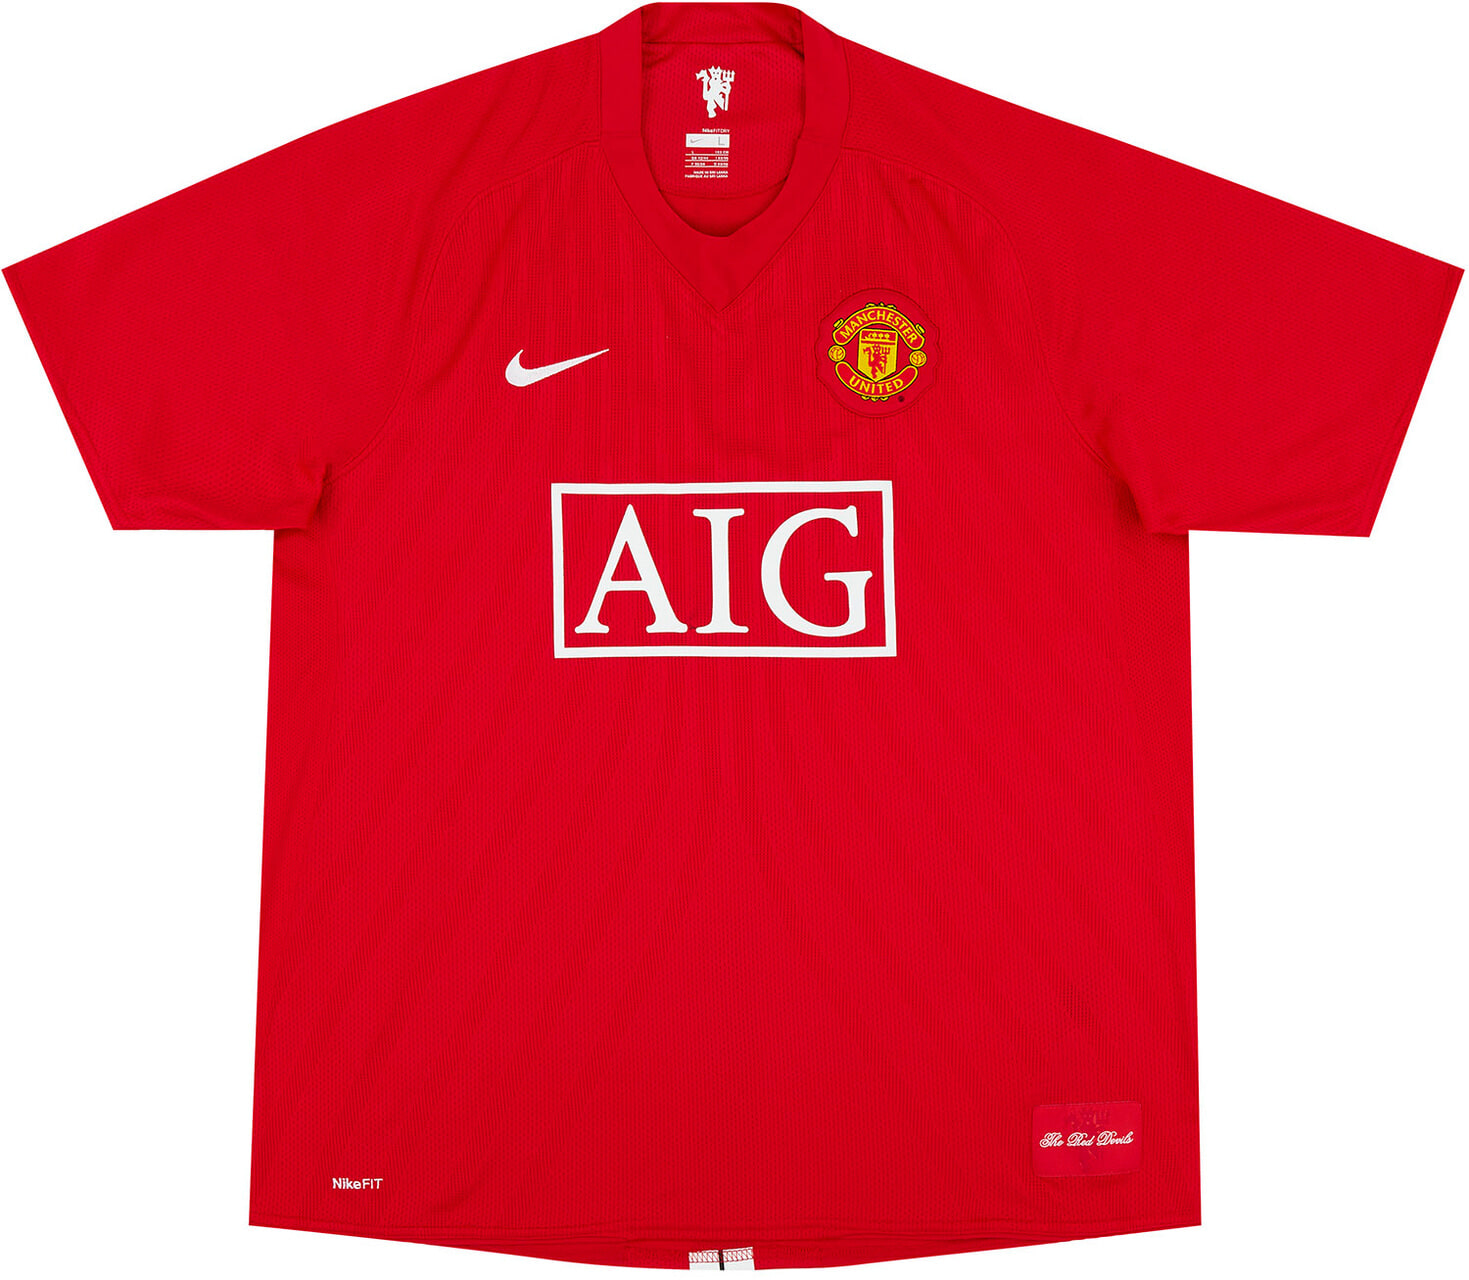 2007-09 Manchester United Home Shirt - 6/10 -